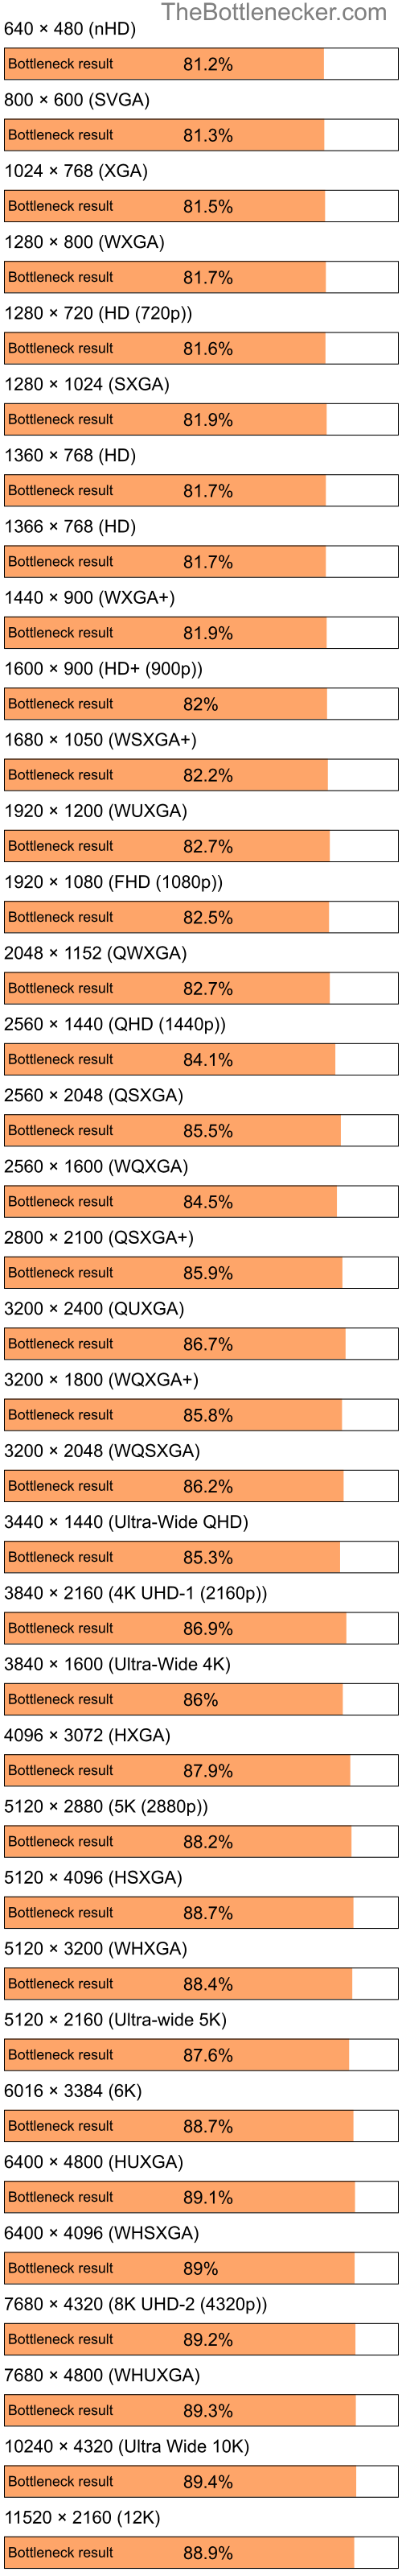 Bottleneck results by resolution for Intel Pentium 4 and AMD Mobility Radeon 9600 in Graphic Card Intense Tasks